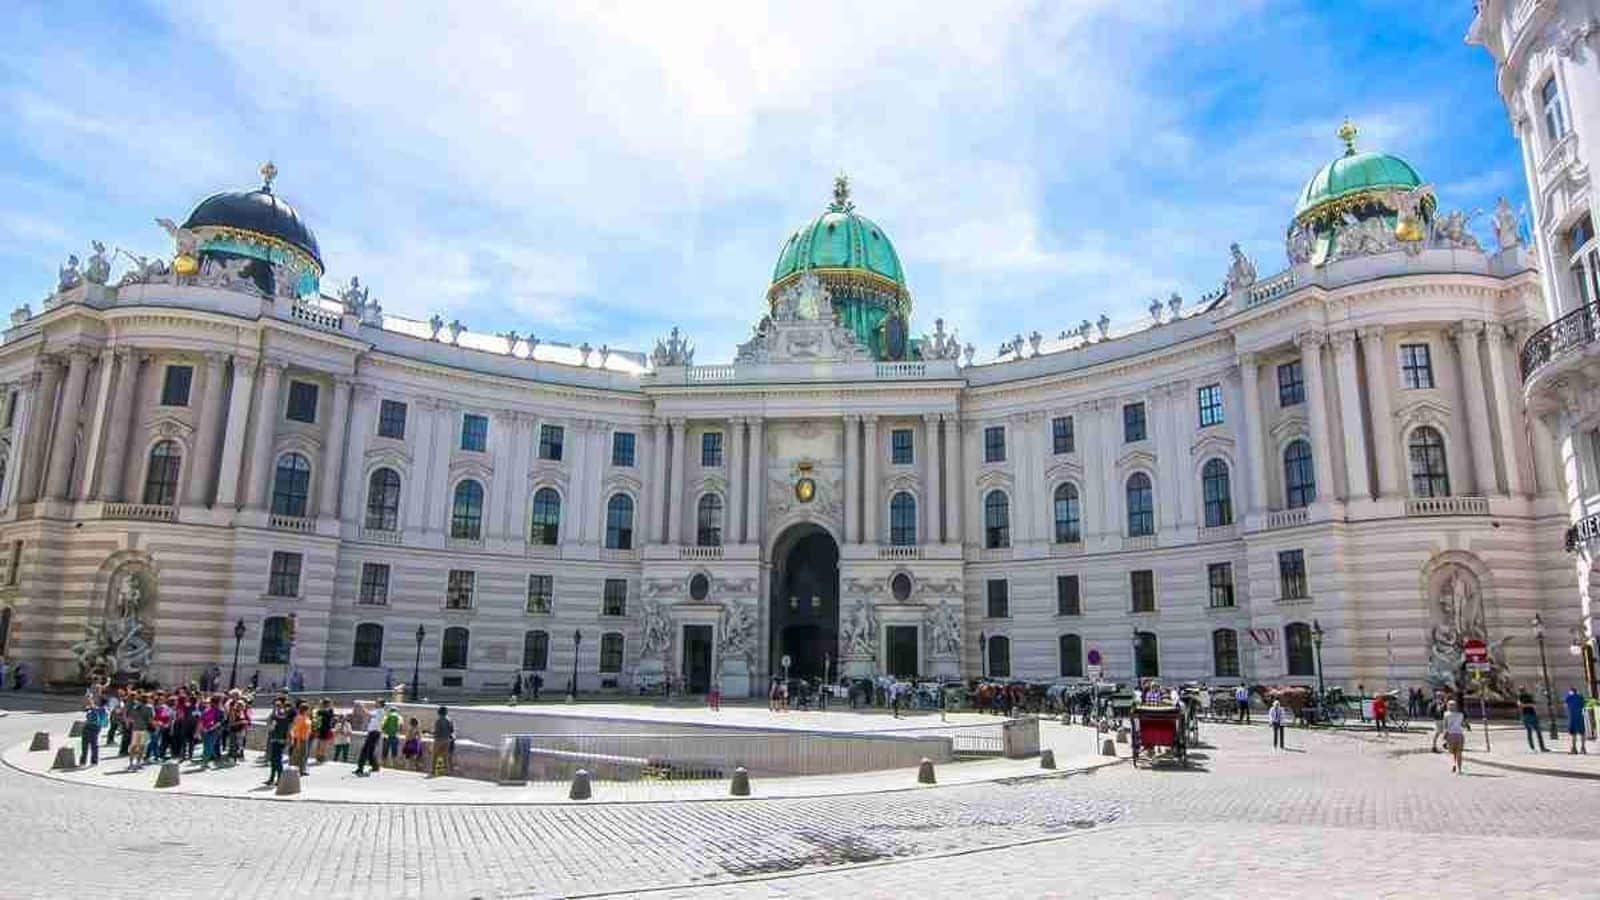 Things to explore in Vienna's Hofburg Palace